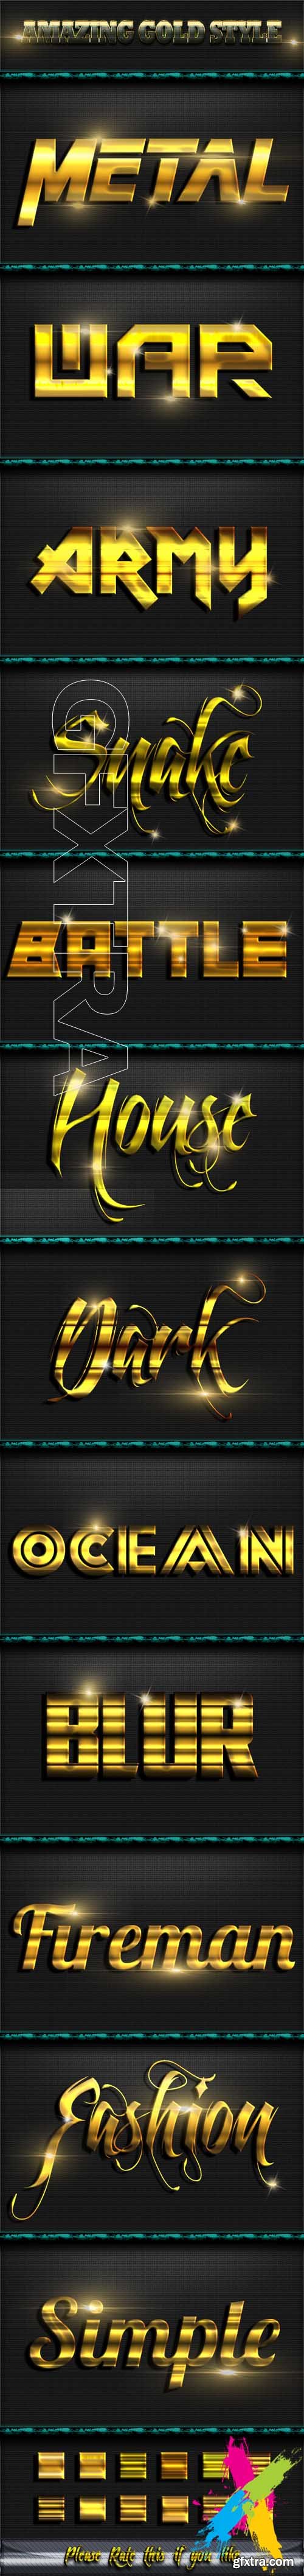 Graphicriver - Amazing Gold Style Text Effect 20162756